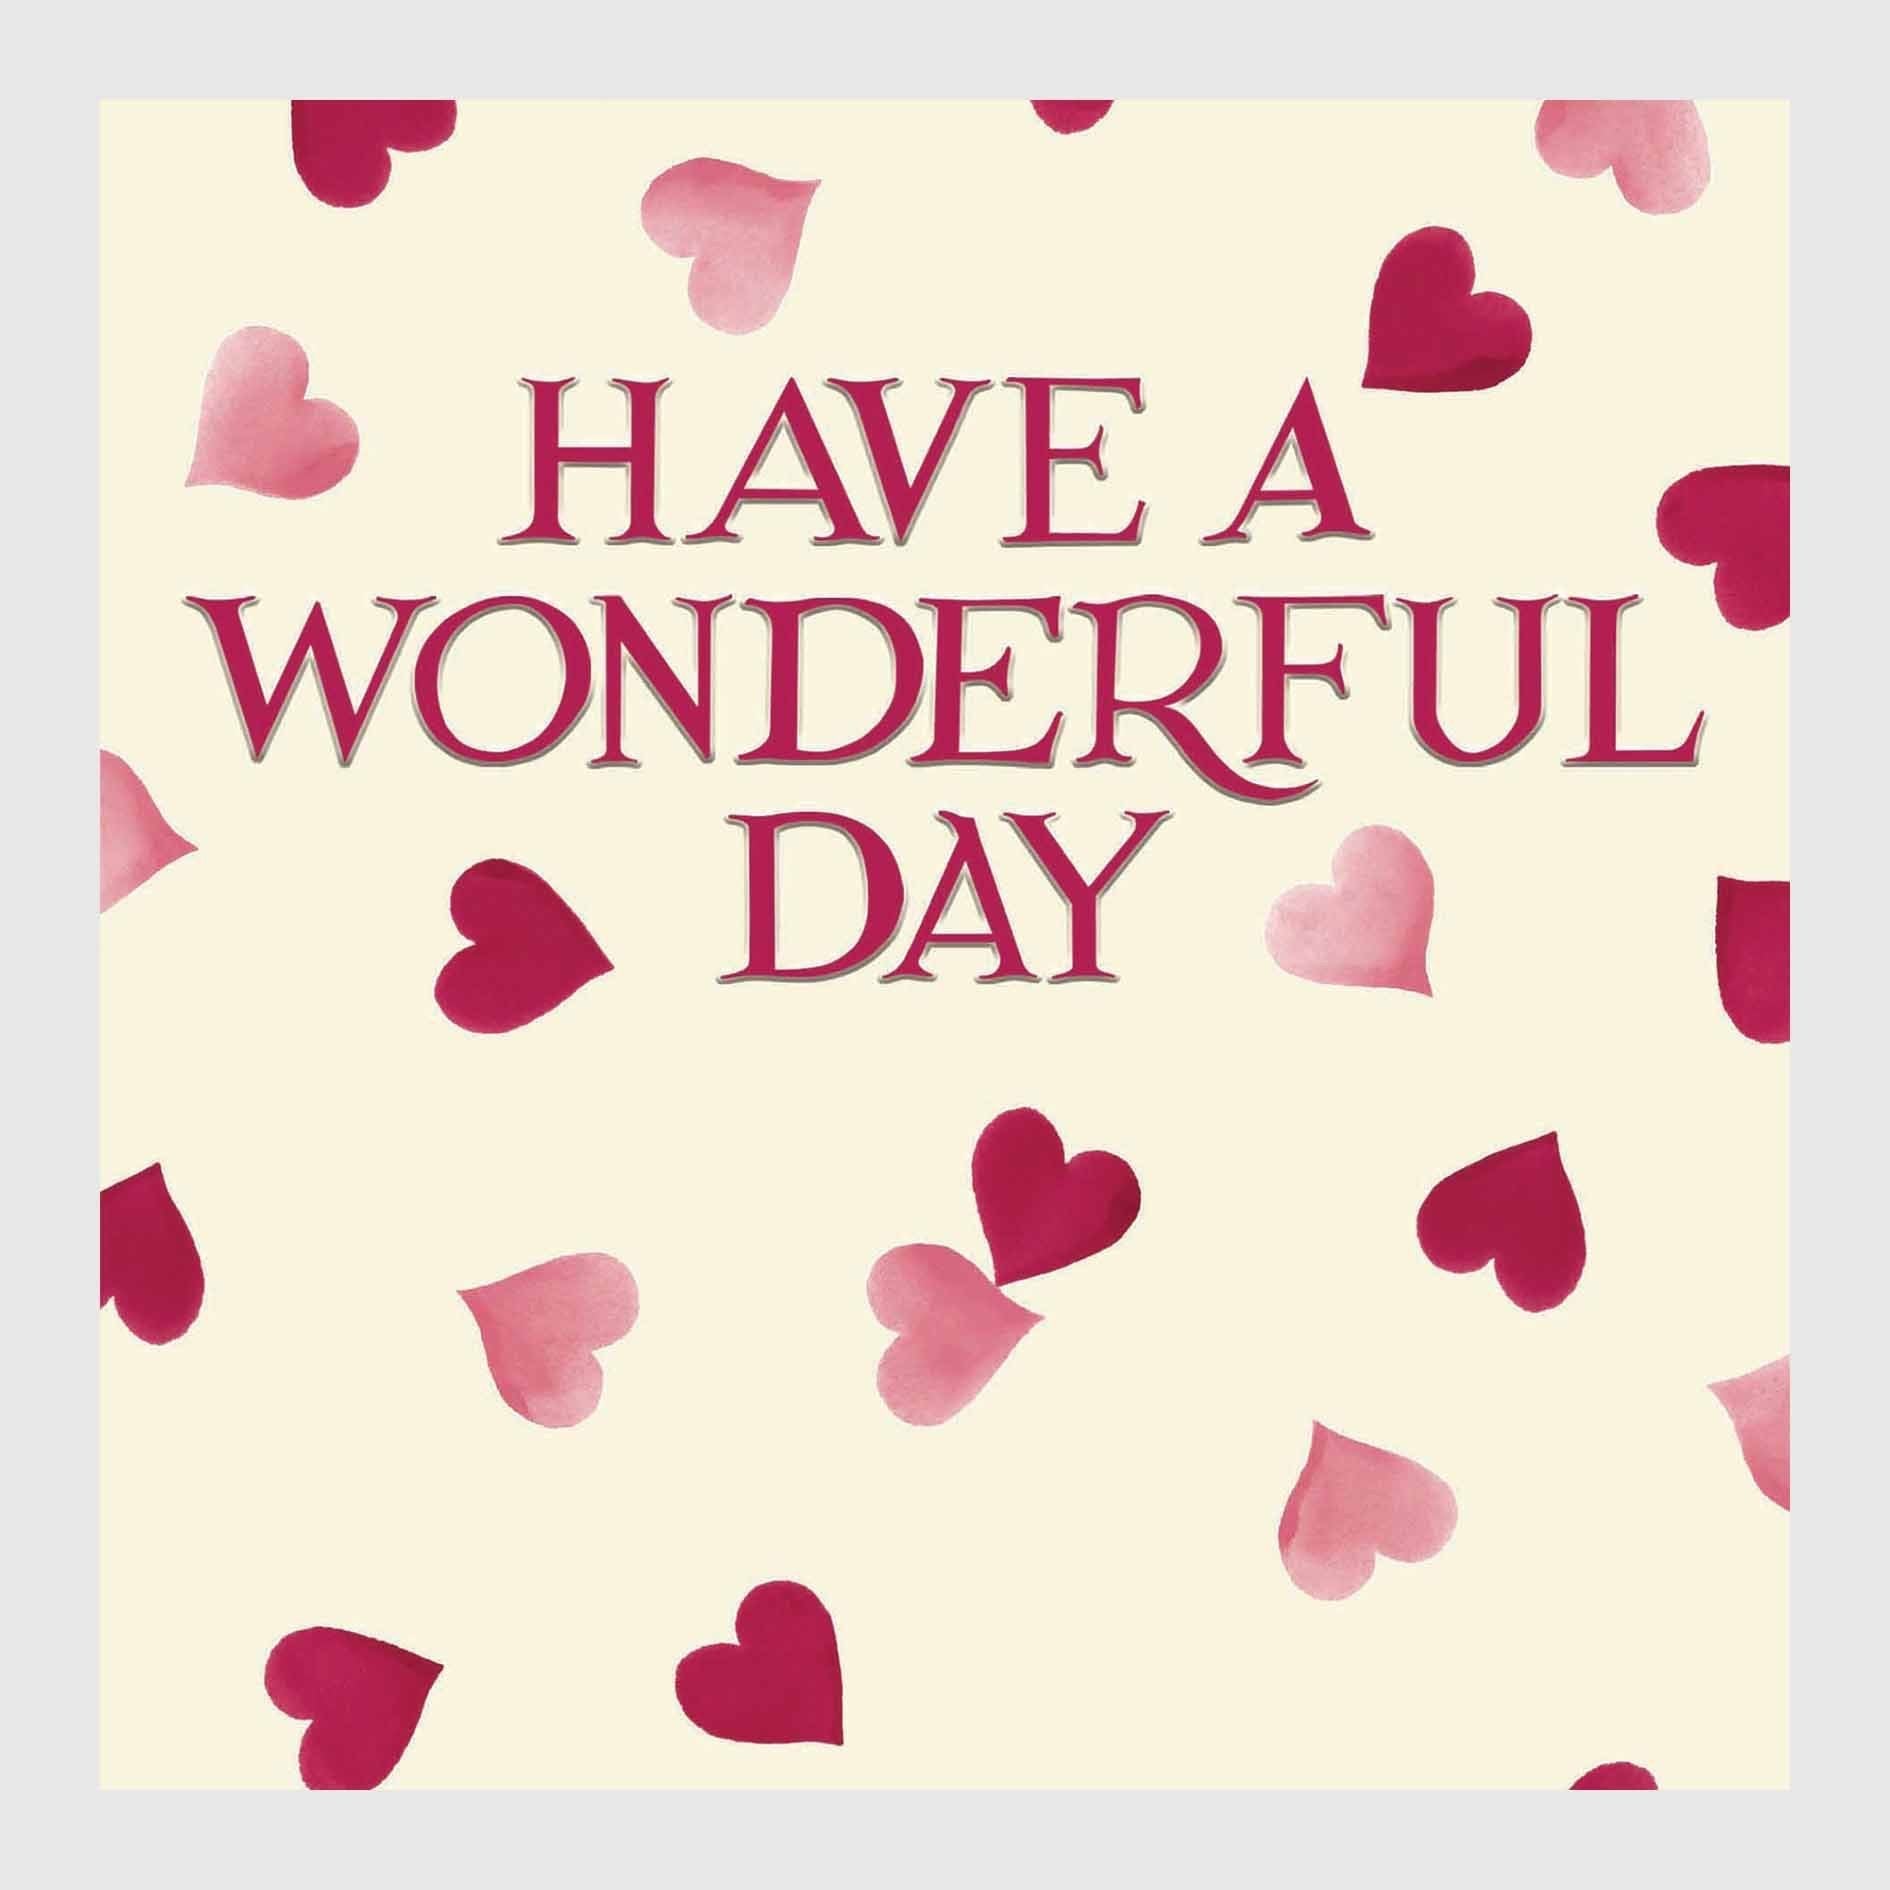 Have a Wonderful Day - Pink Hearts